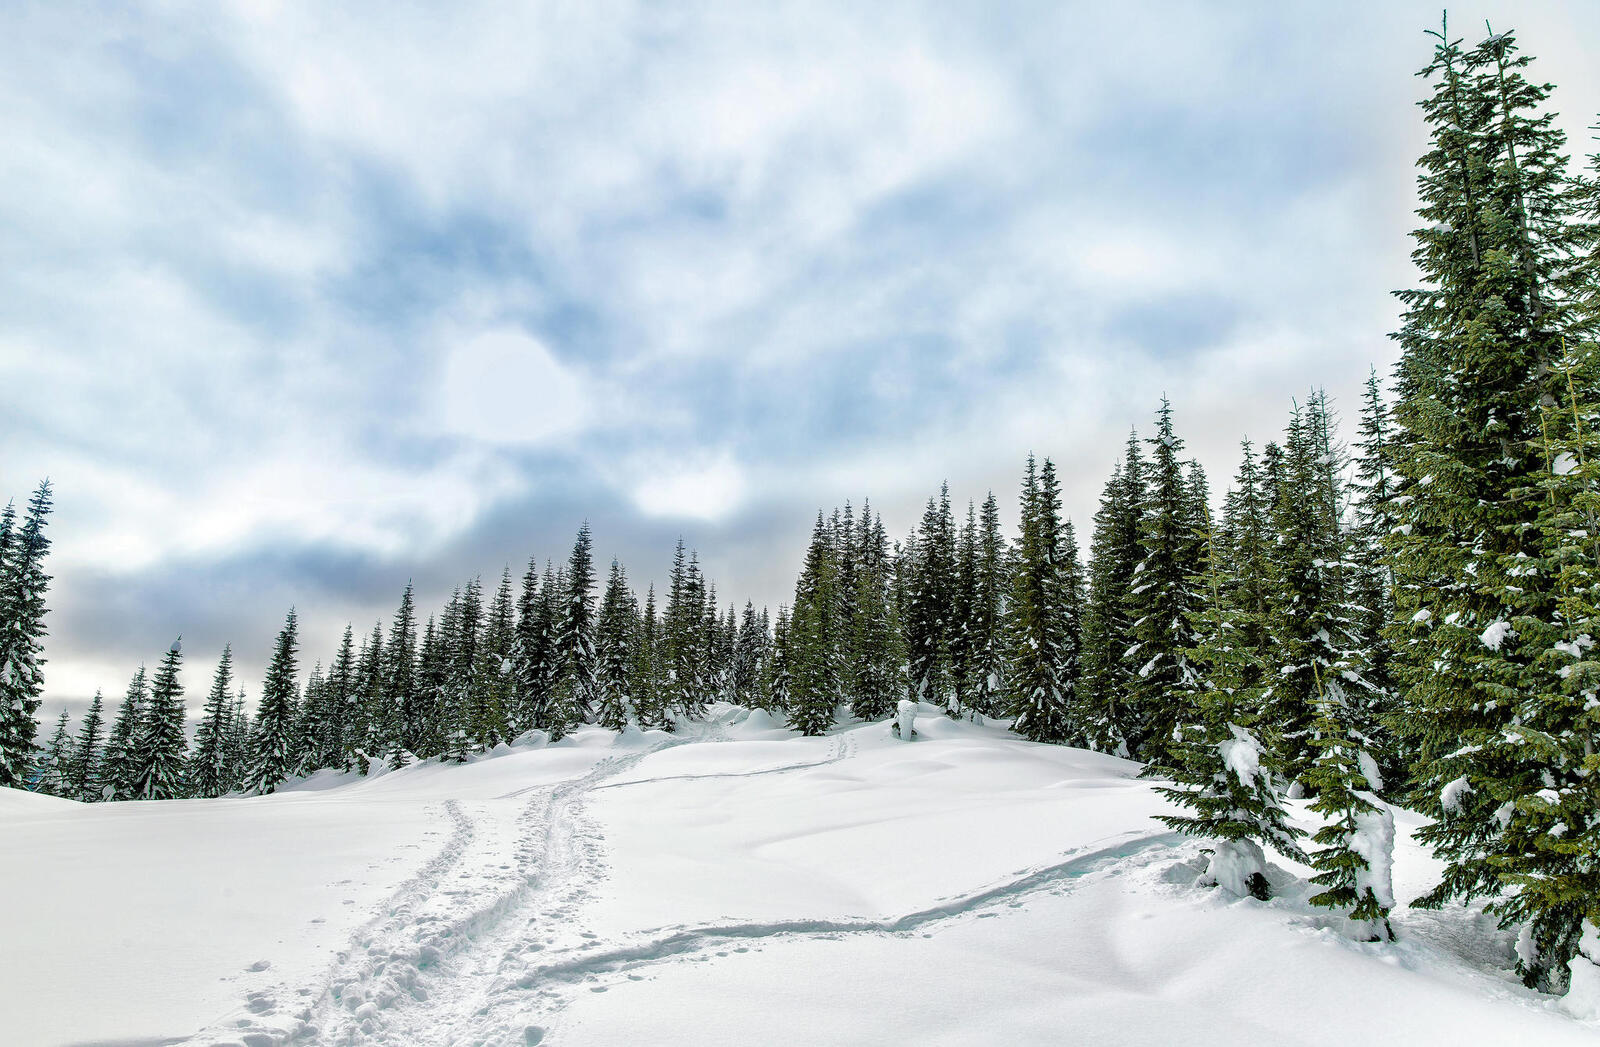 Free photo To download photo of trees, snow